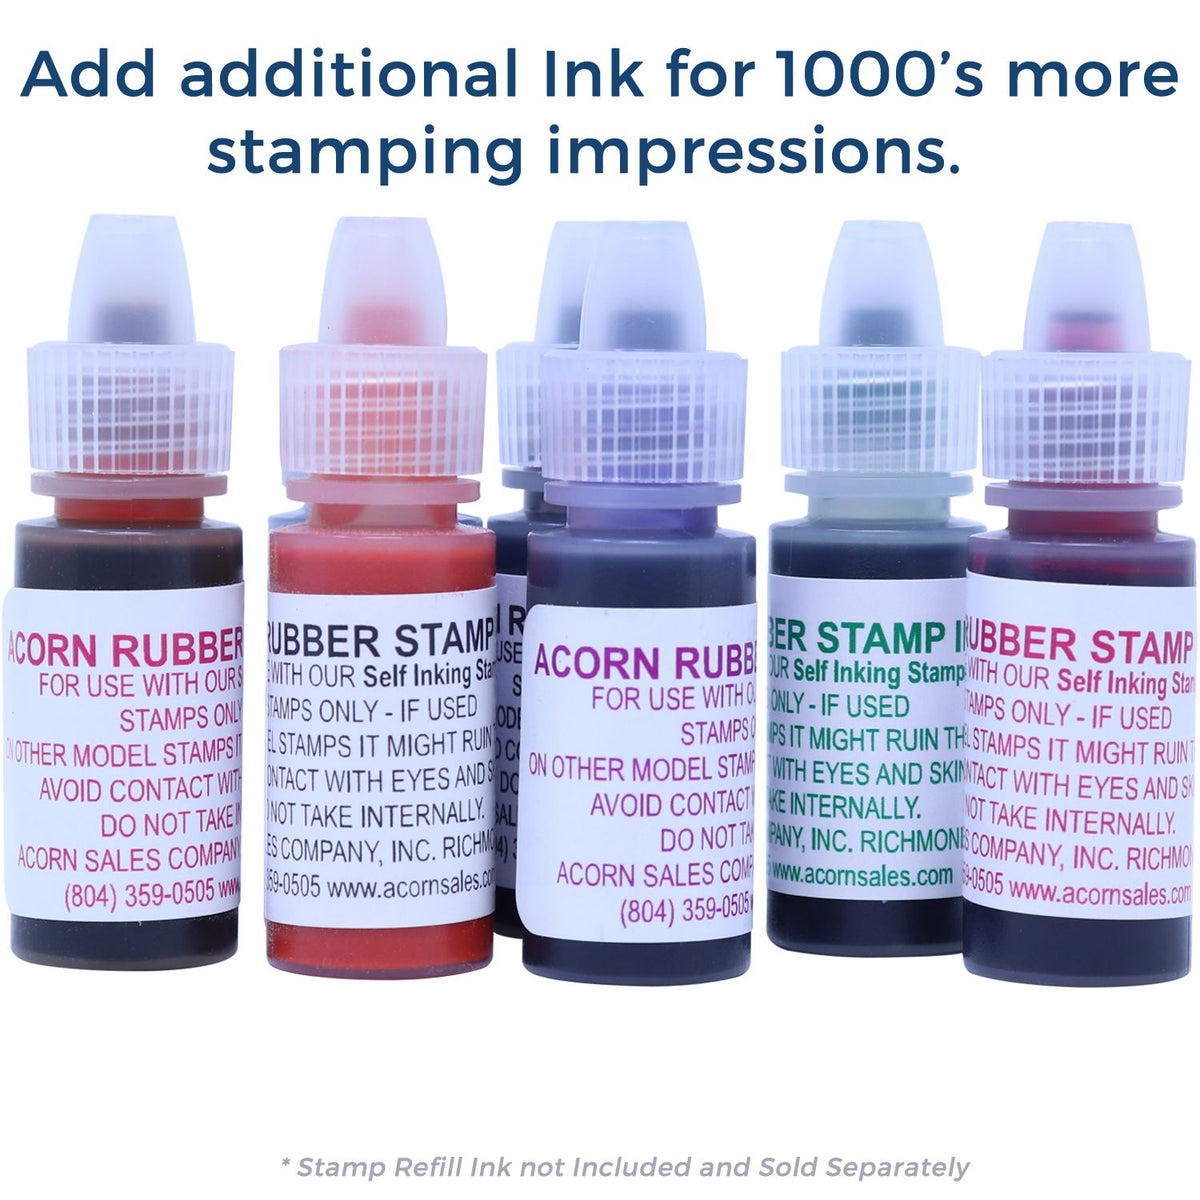 Refill Ink for Self-Inking Round Sign Here with Arrow Stamp Available